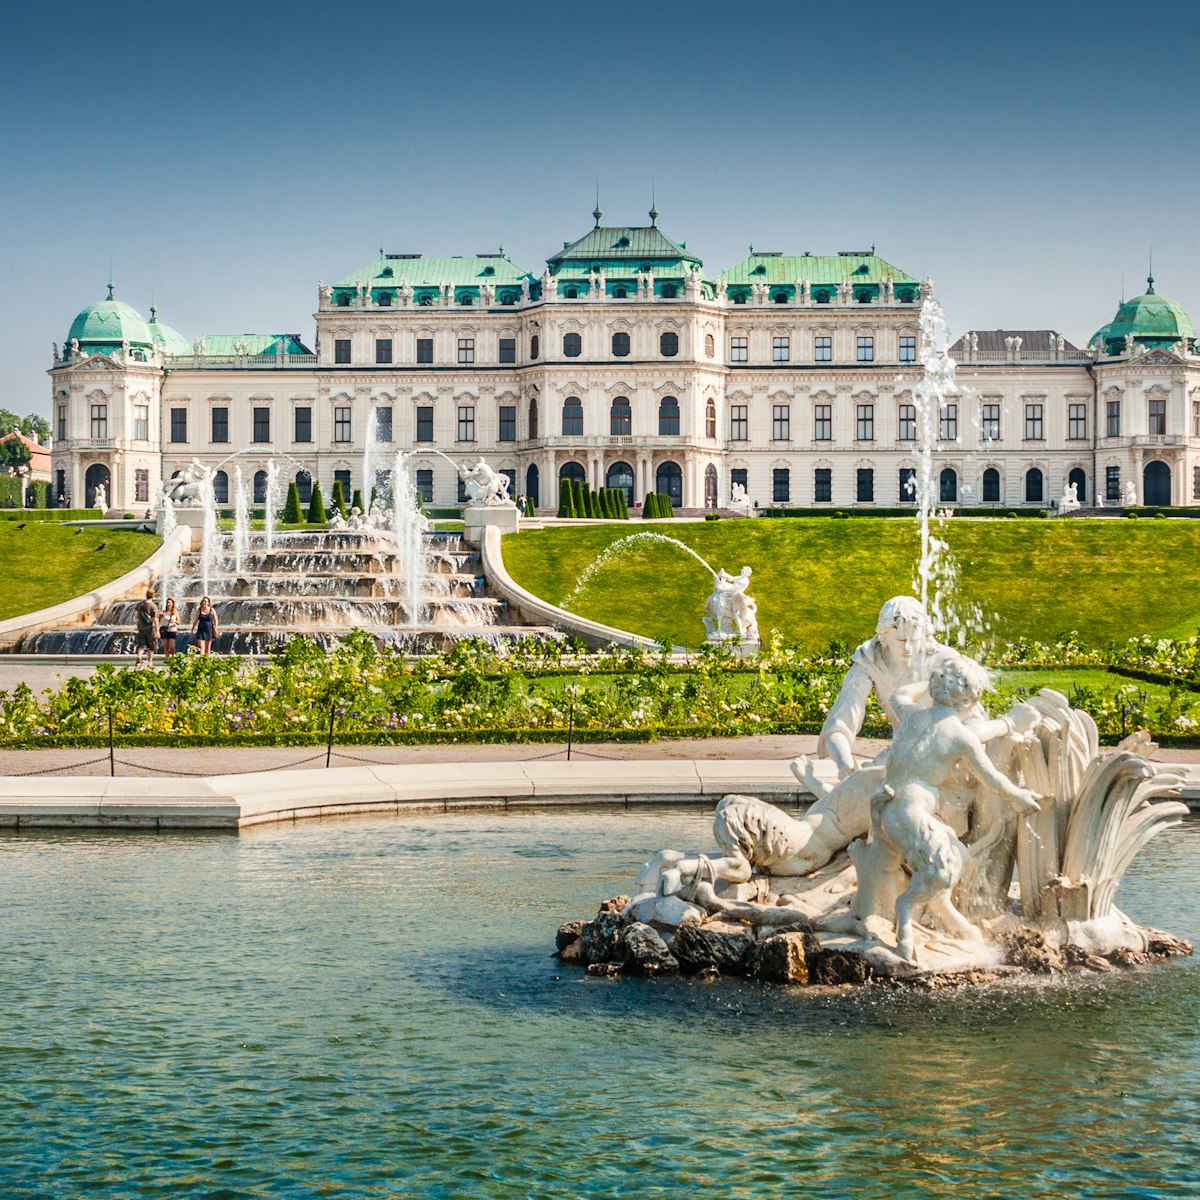 Beautiful view of famous Schloss Belvedere, built by Johann Lukas von Hildebrandt as a summer residence for Prince Eugene of Savoy, in Vienna, Austria; Shutterstock ID 249139849; Your name (First / Last): Josh Vogel; Project no. or GL code: 56530; Network activity no. or Cost Centre: Online-Design; Product or Project: 65050/7529/Josh Vogel/LP.com Destination Galleries